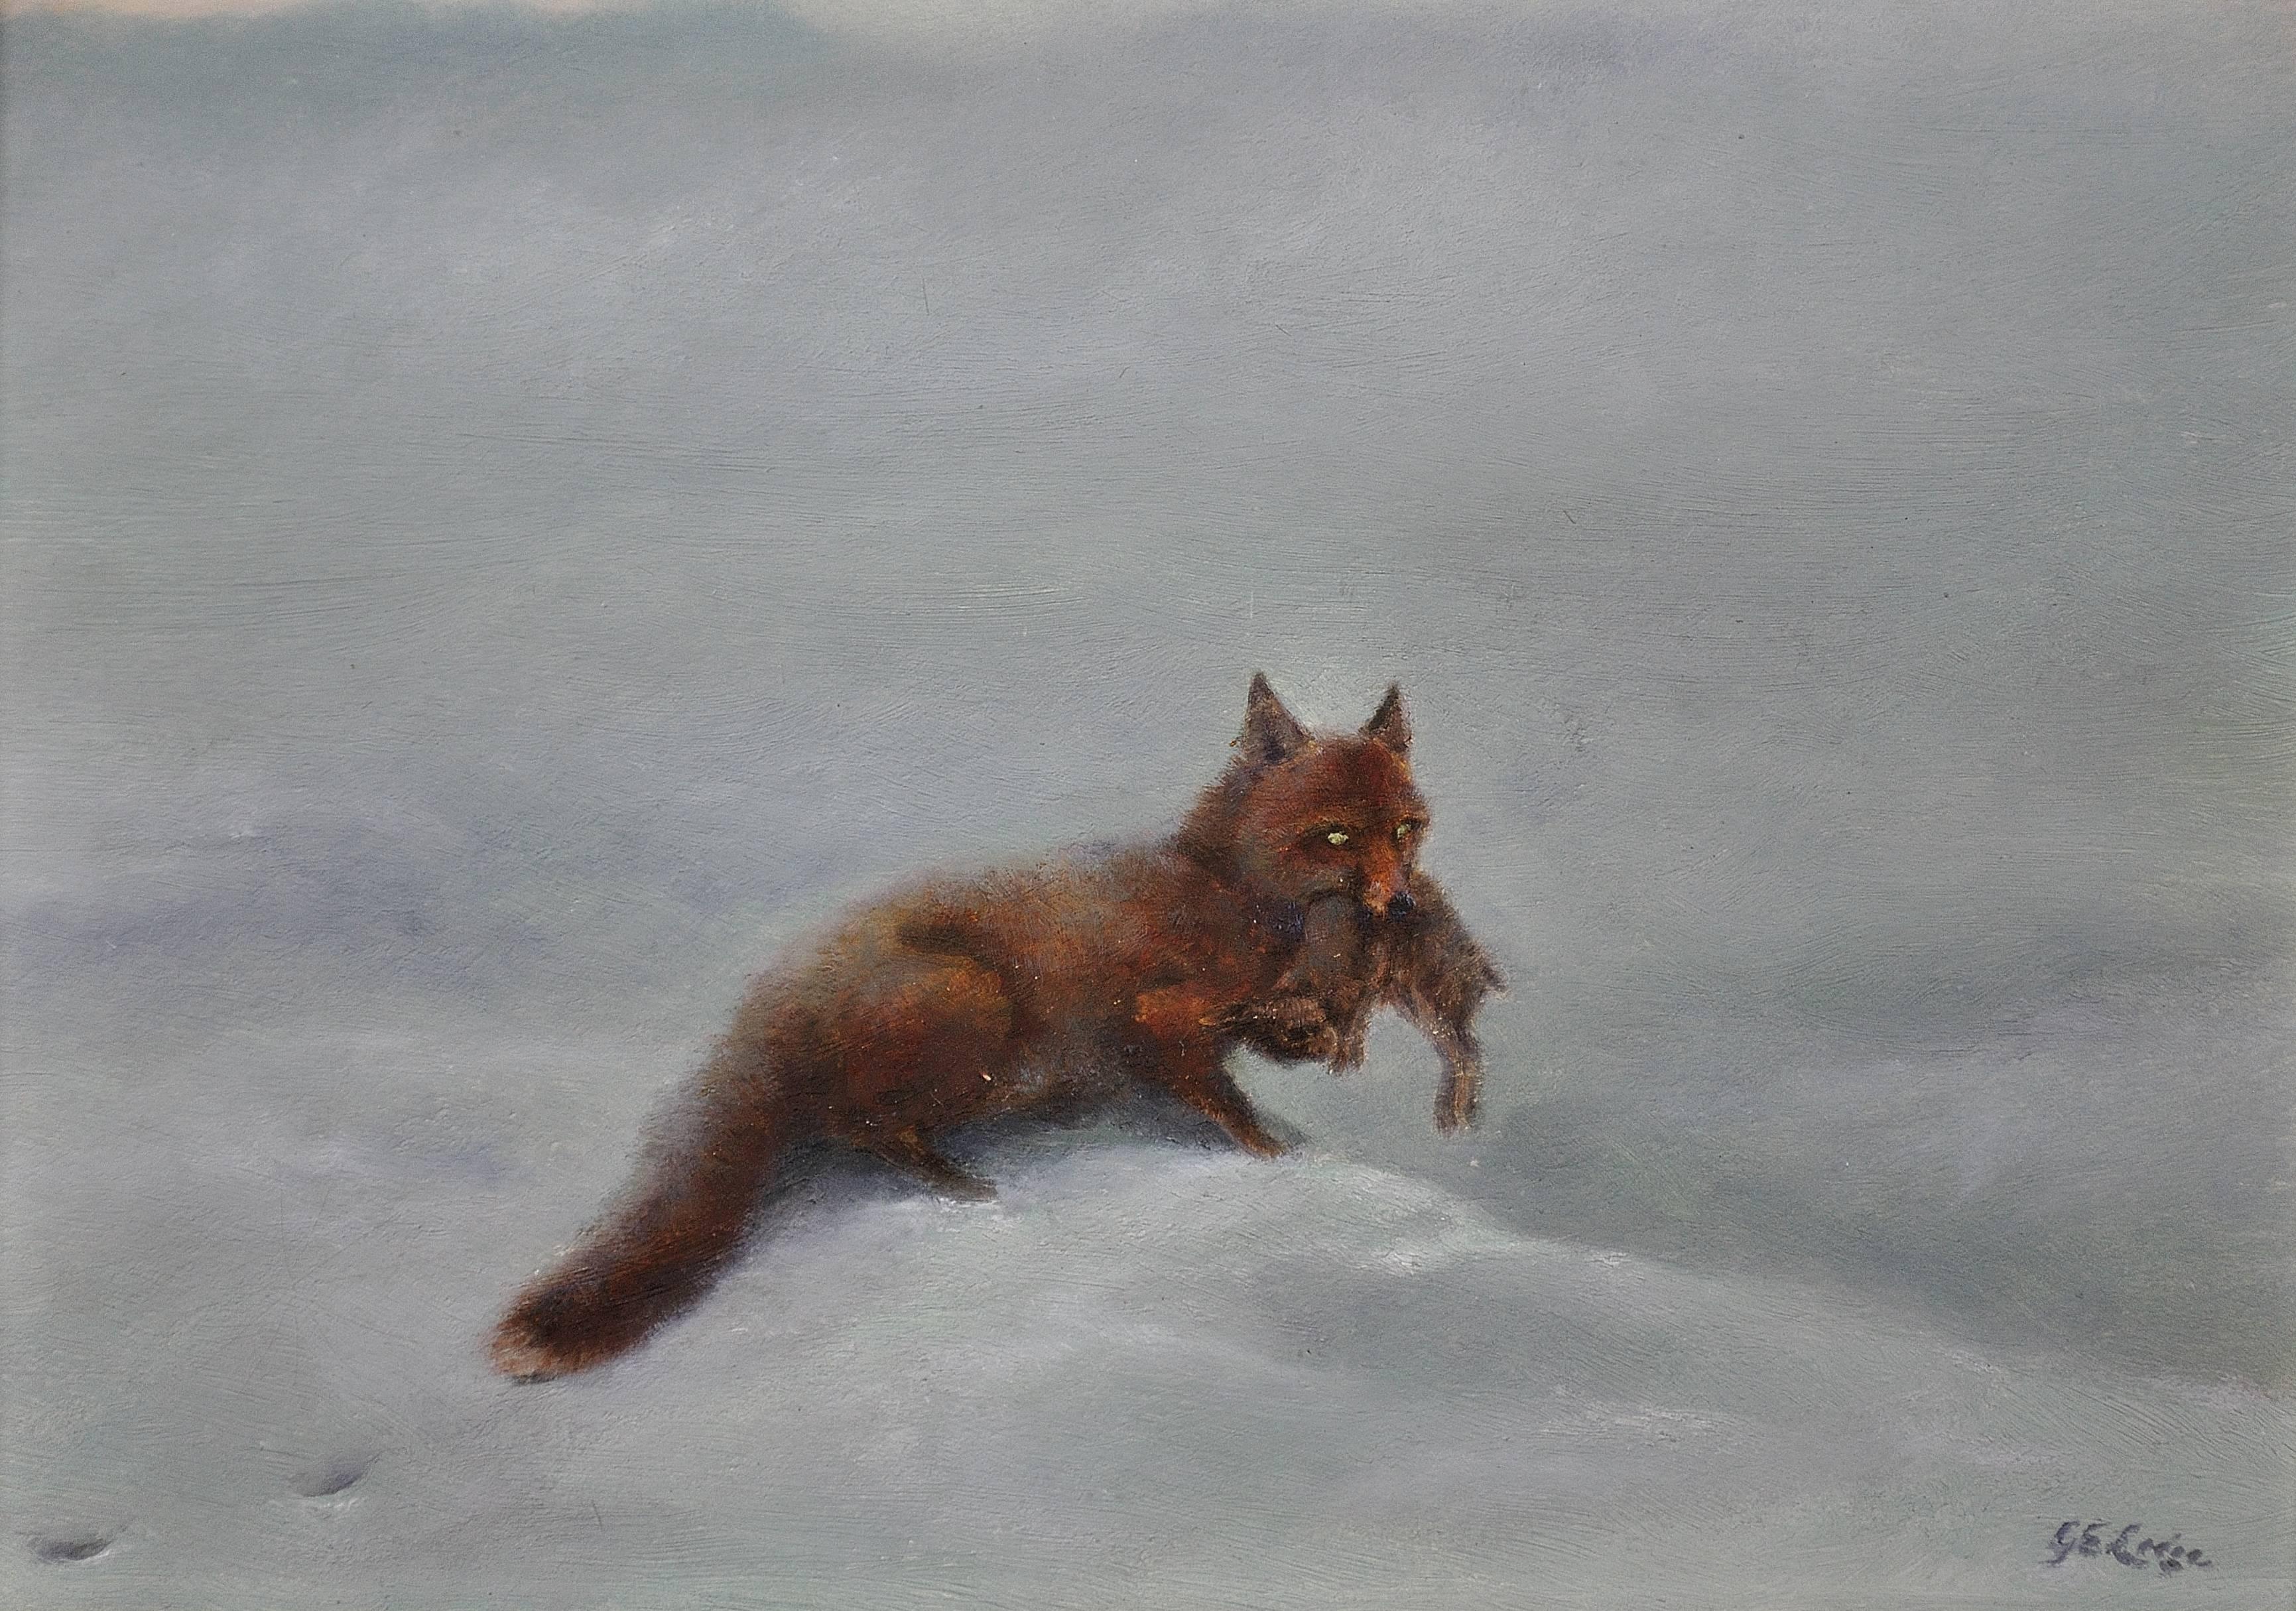 Fox with Leveret amongst snow fields. One of the wildlife greats of all time. - Painting by George Lodge